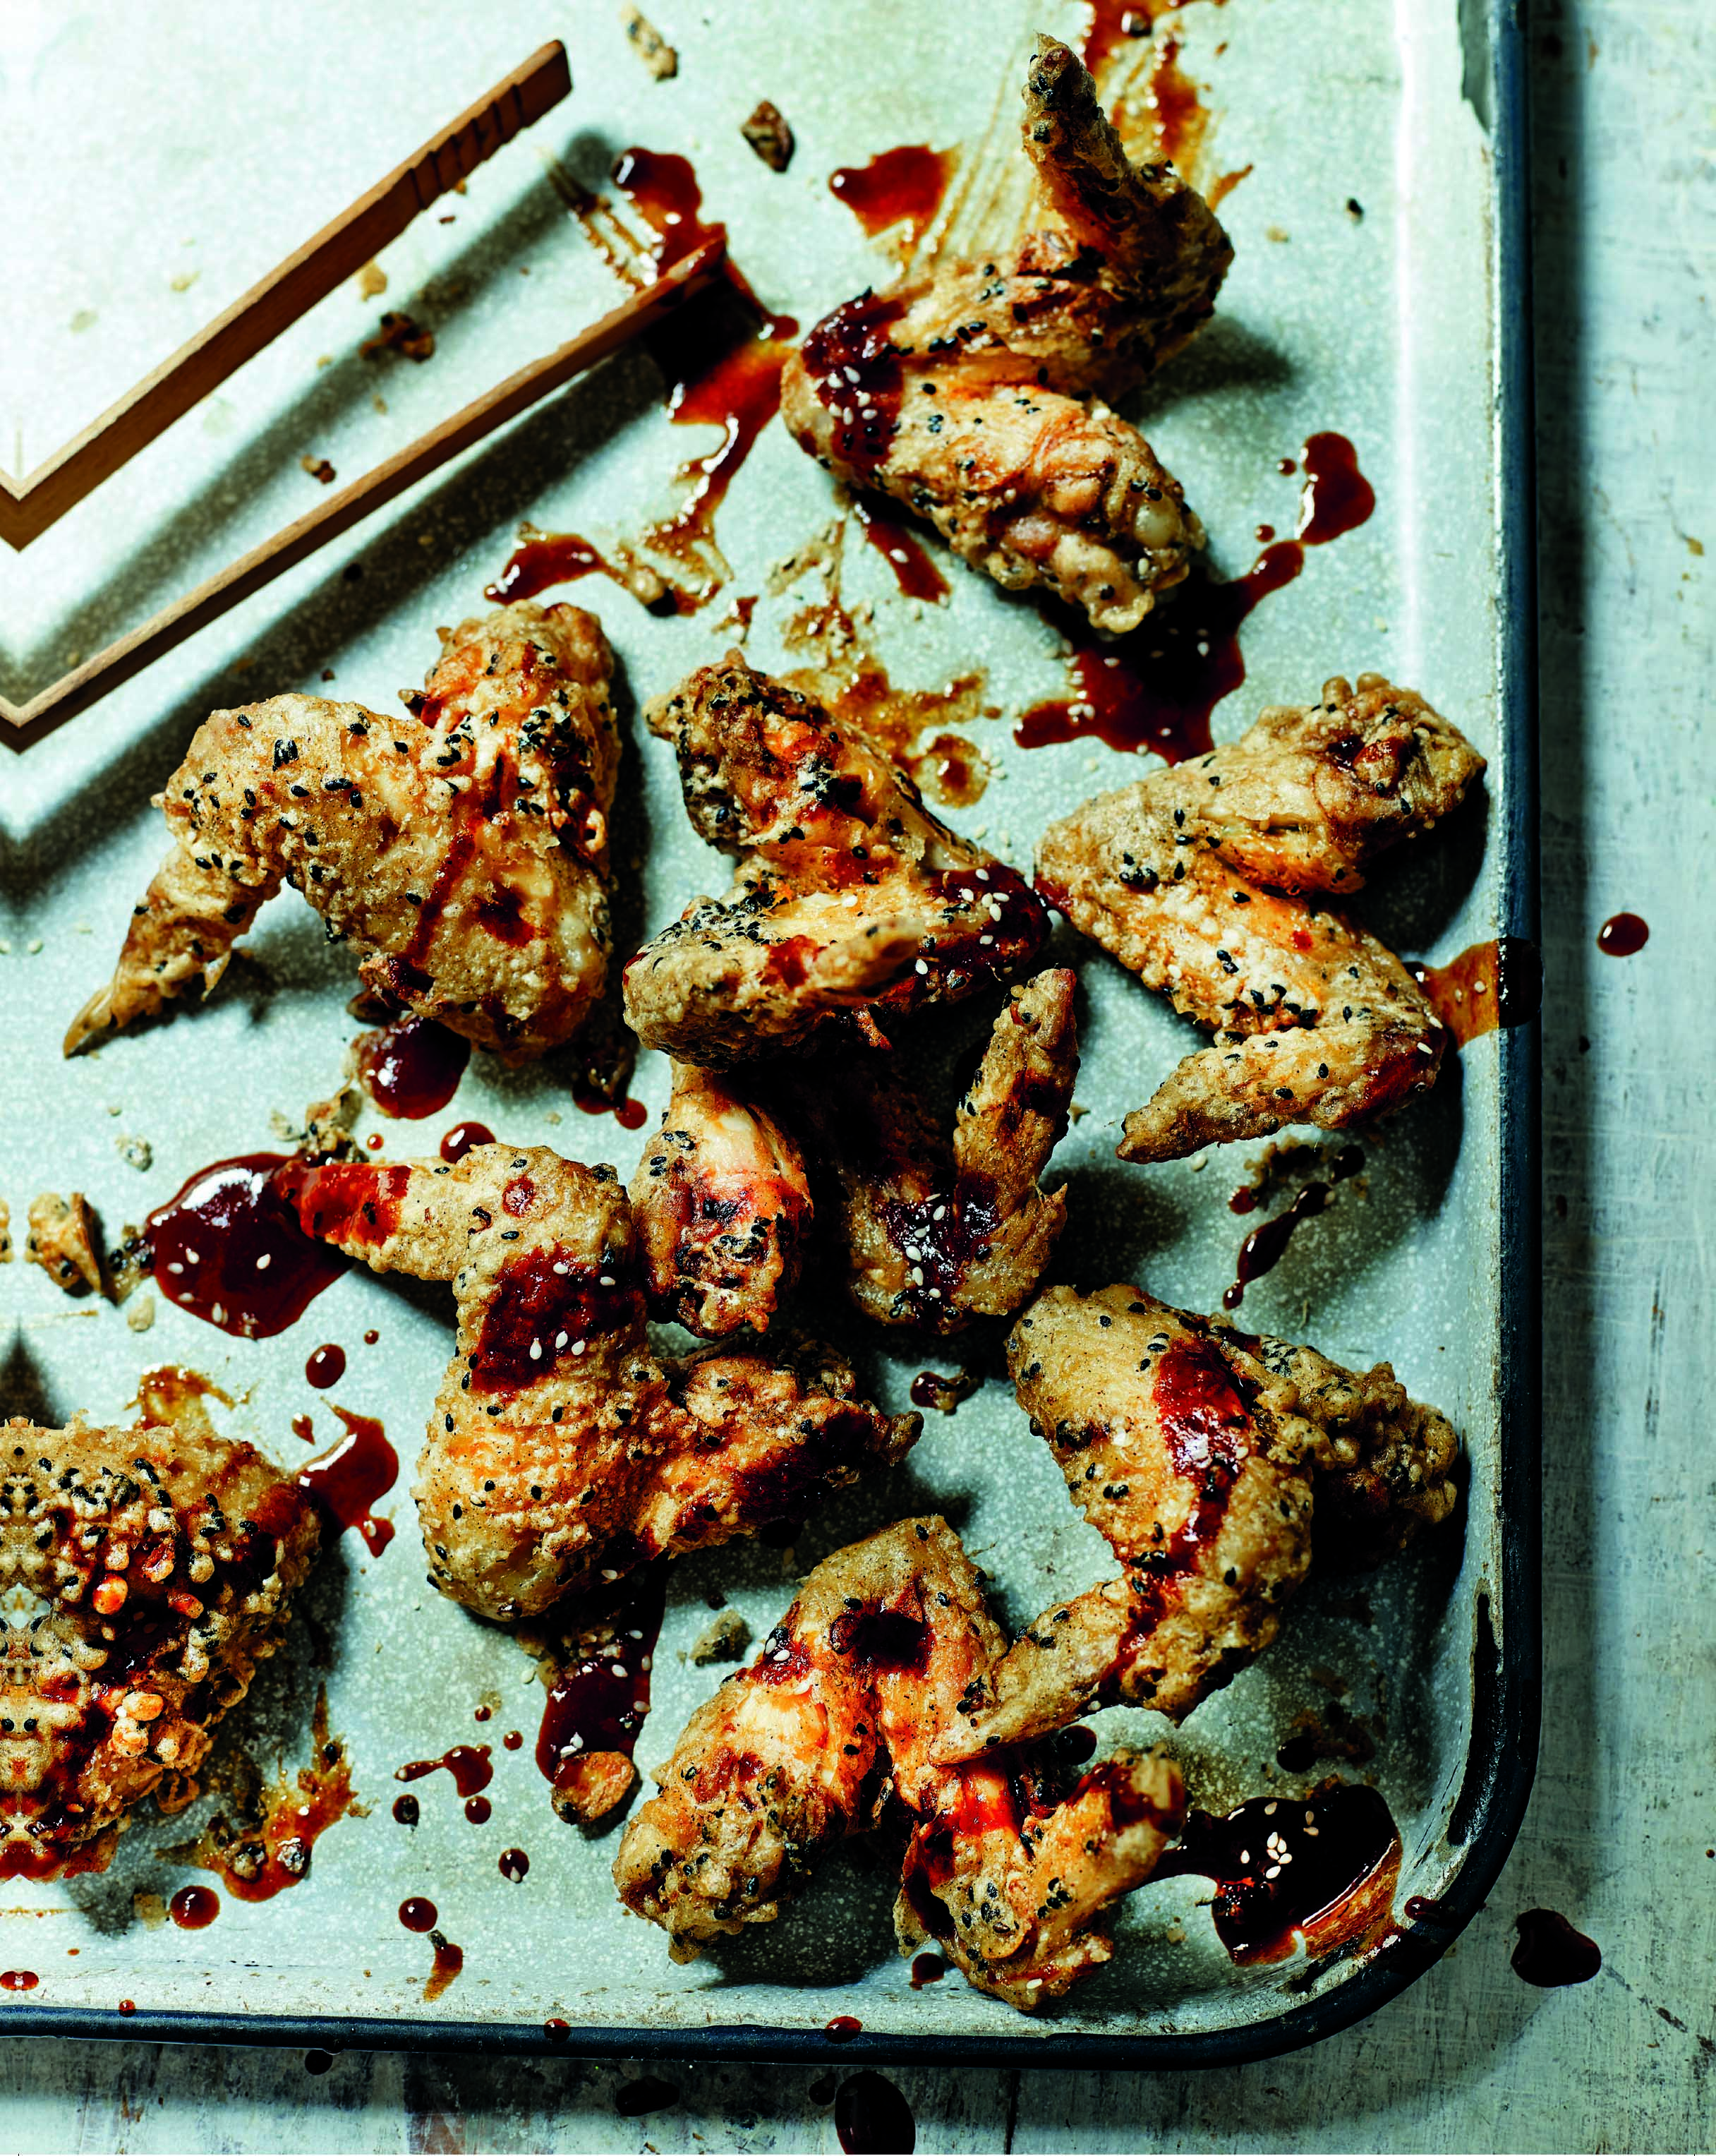 Childhood chicken wings with sticky chilli dip